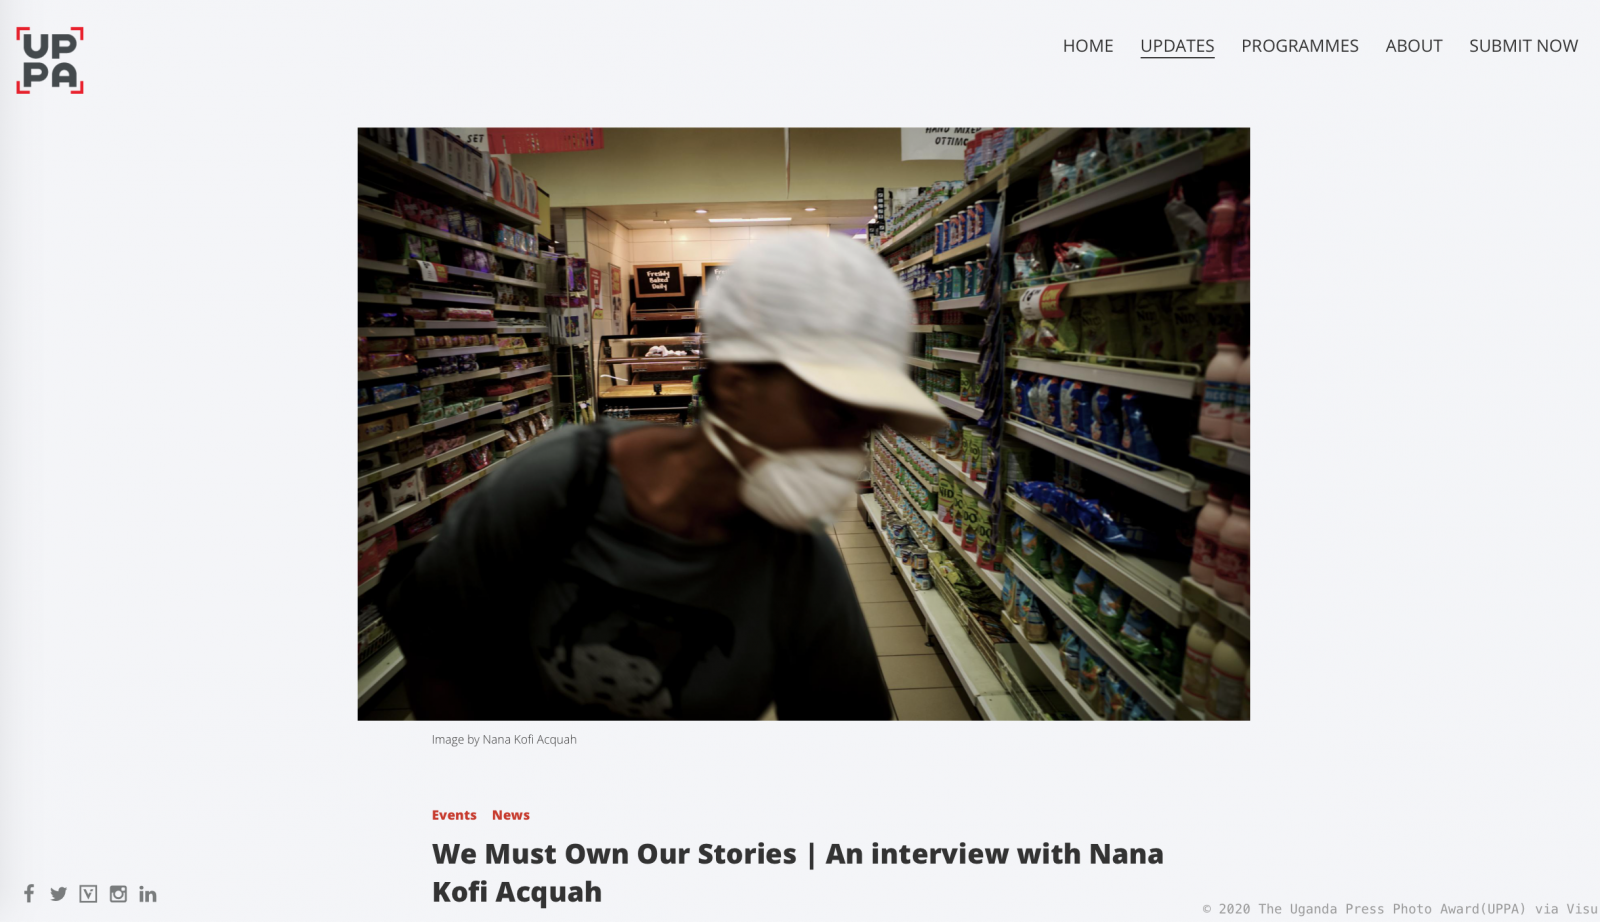 We Must Own Our Stories | An interview with Nana Kofi Acquah